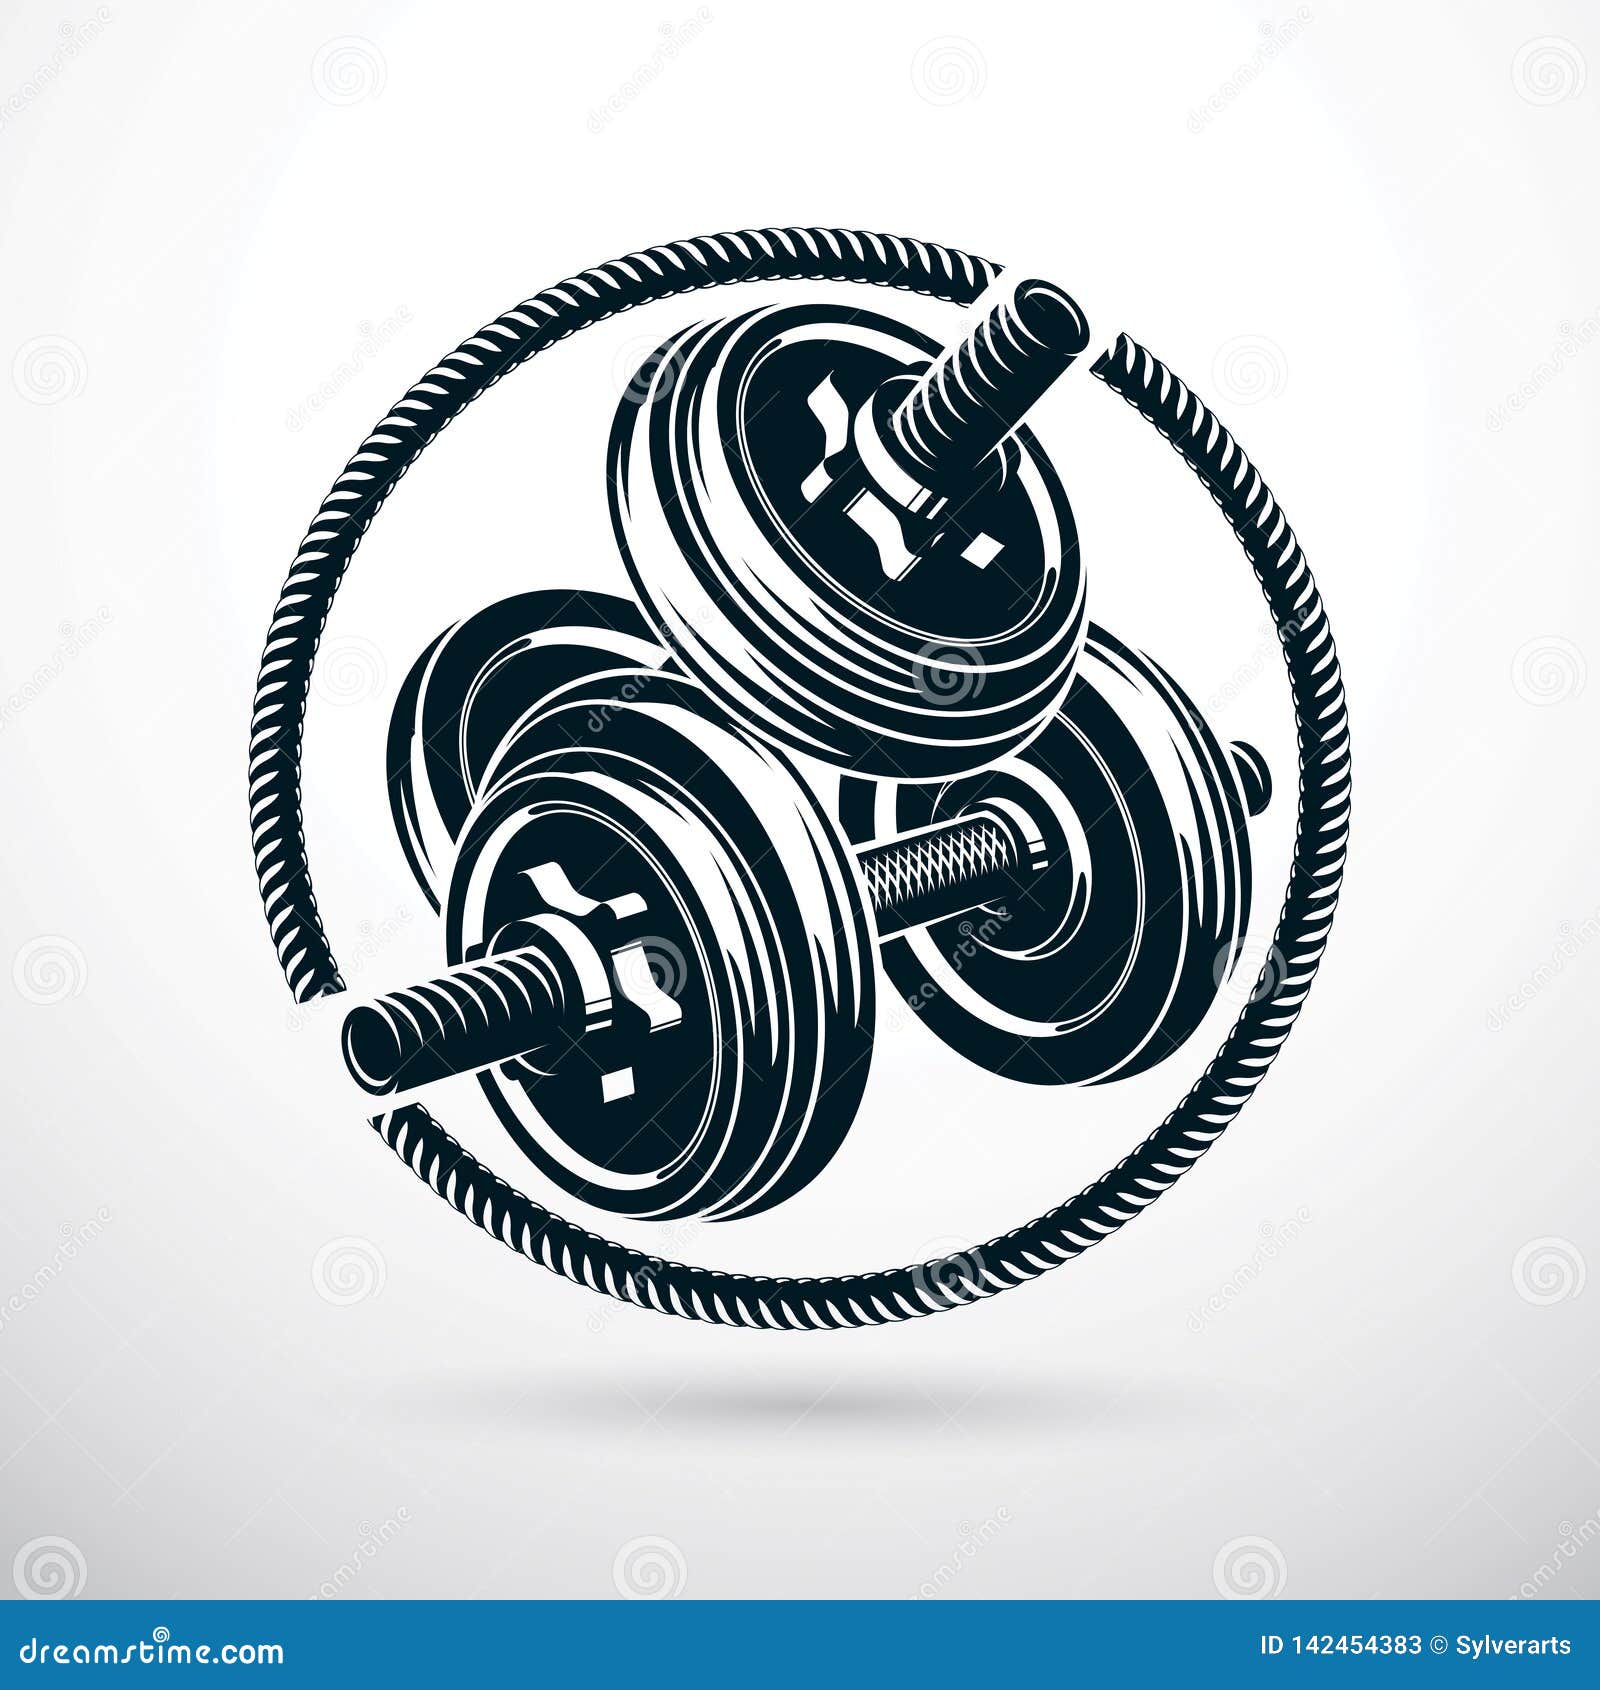 Dumbbell With Disc Weight Vector Illustration. Stock ...